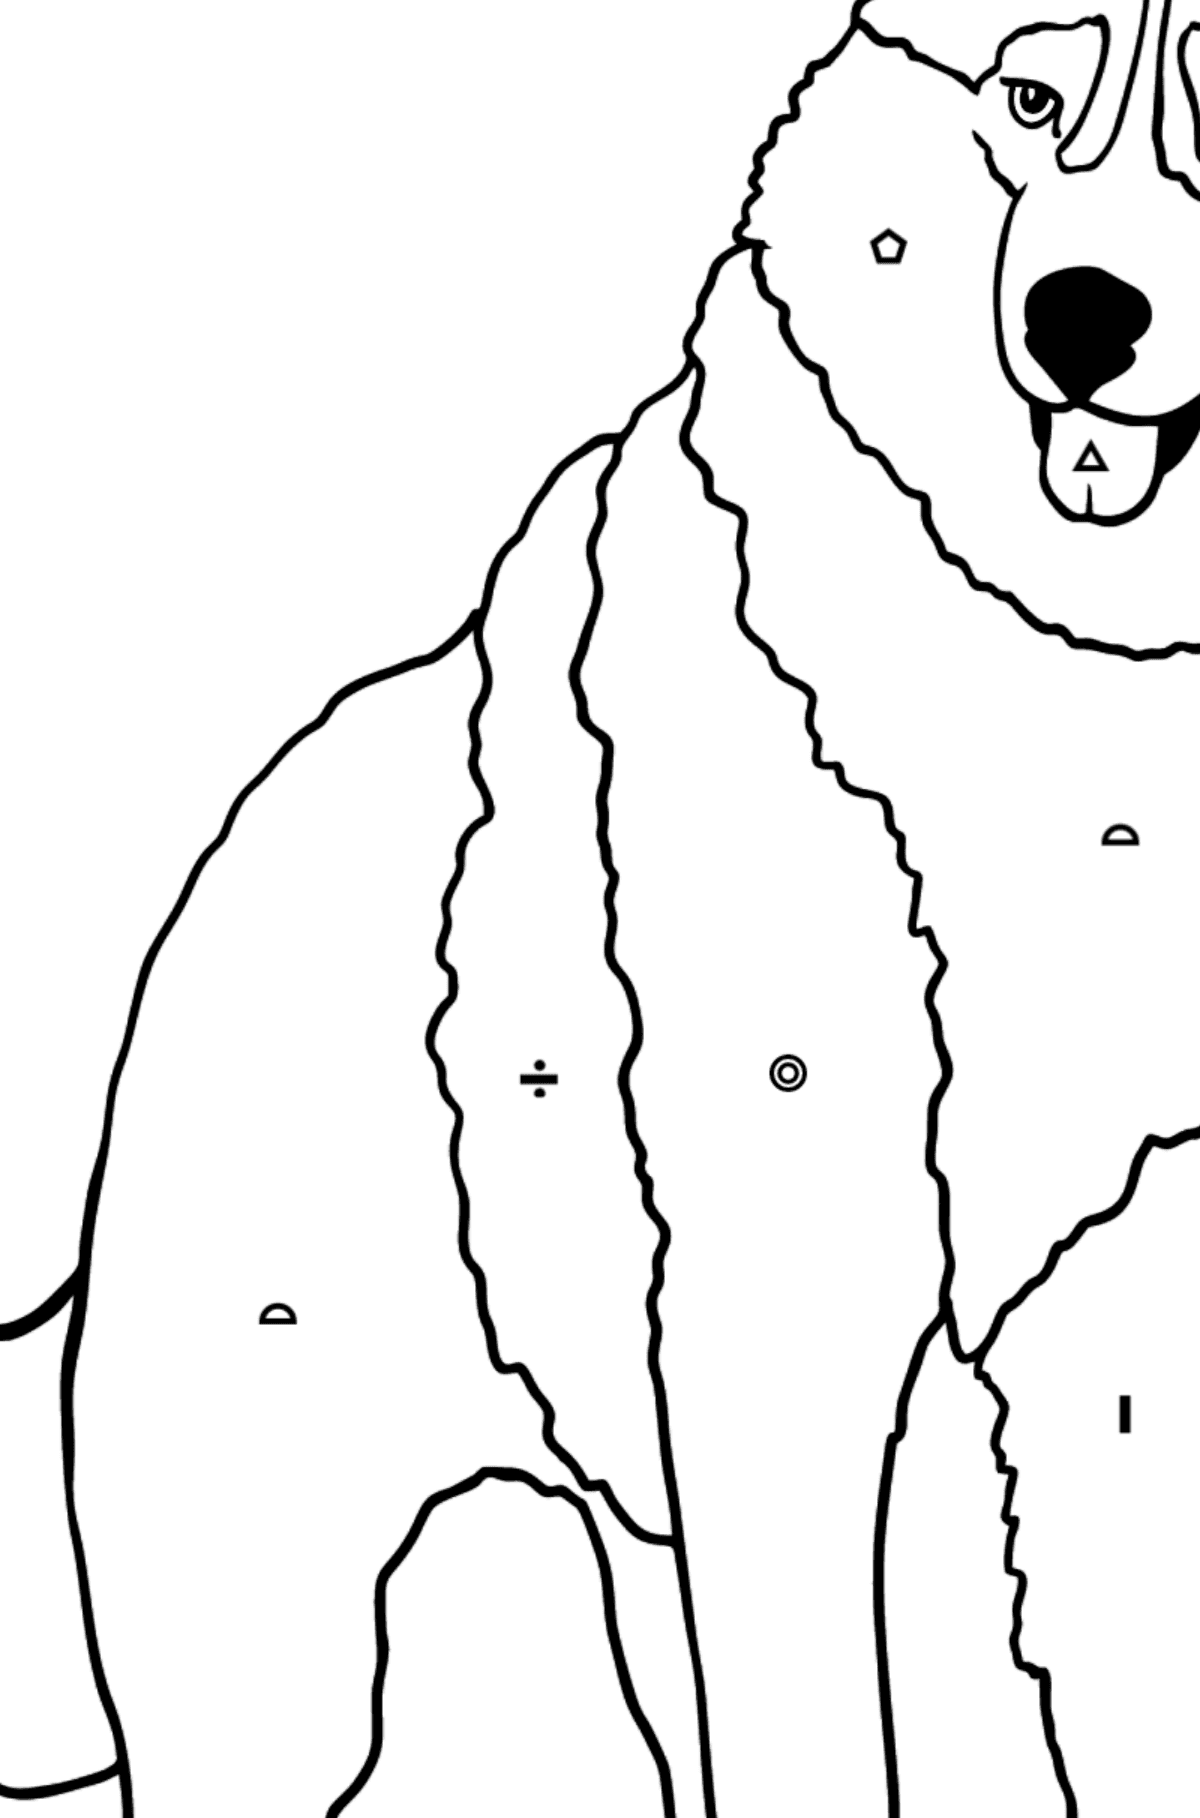 Husky coloring page - Coloring by Symbols and Geometric Shapes for Kids